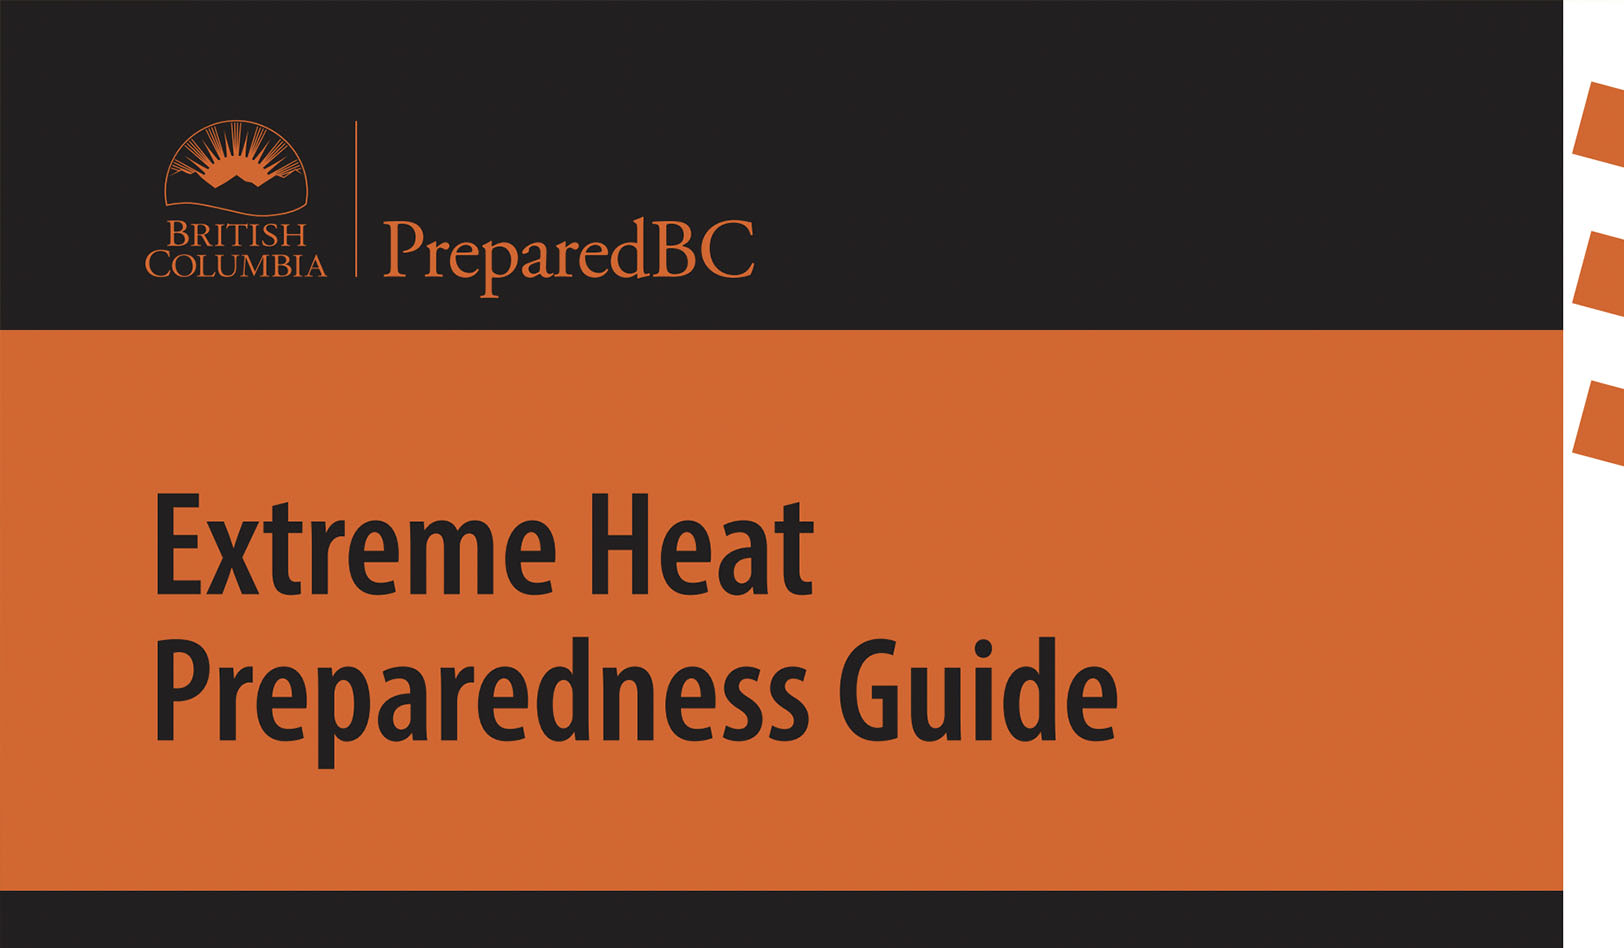 Resources for Preparing for Extreme Heat